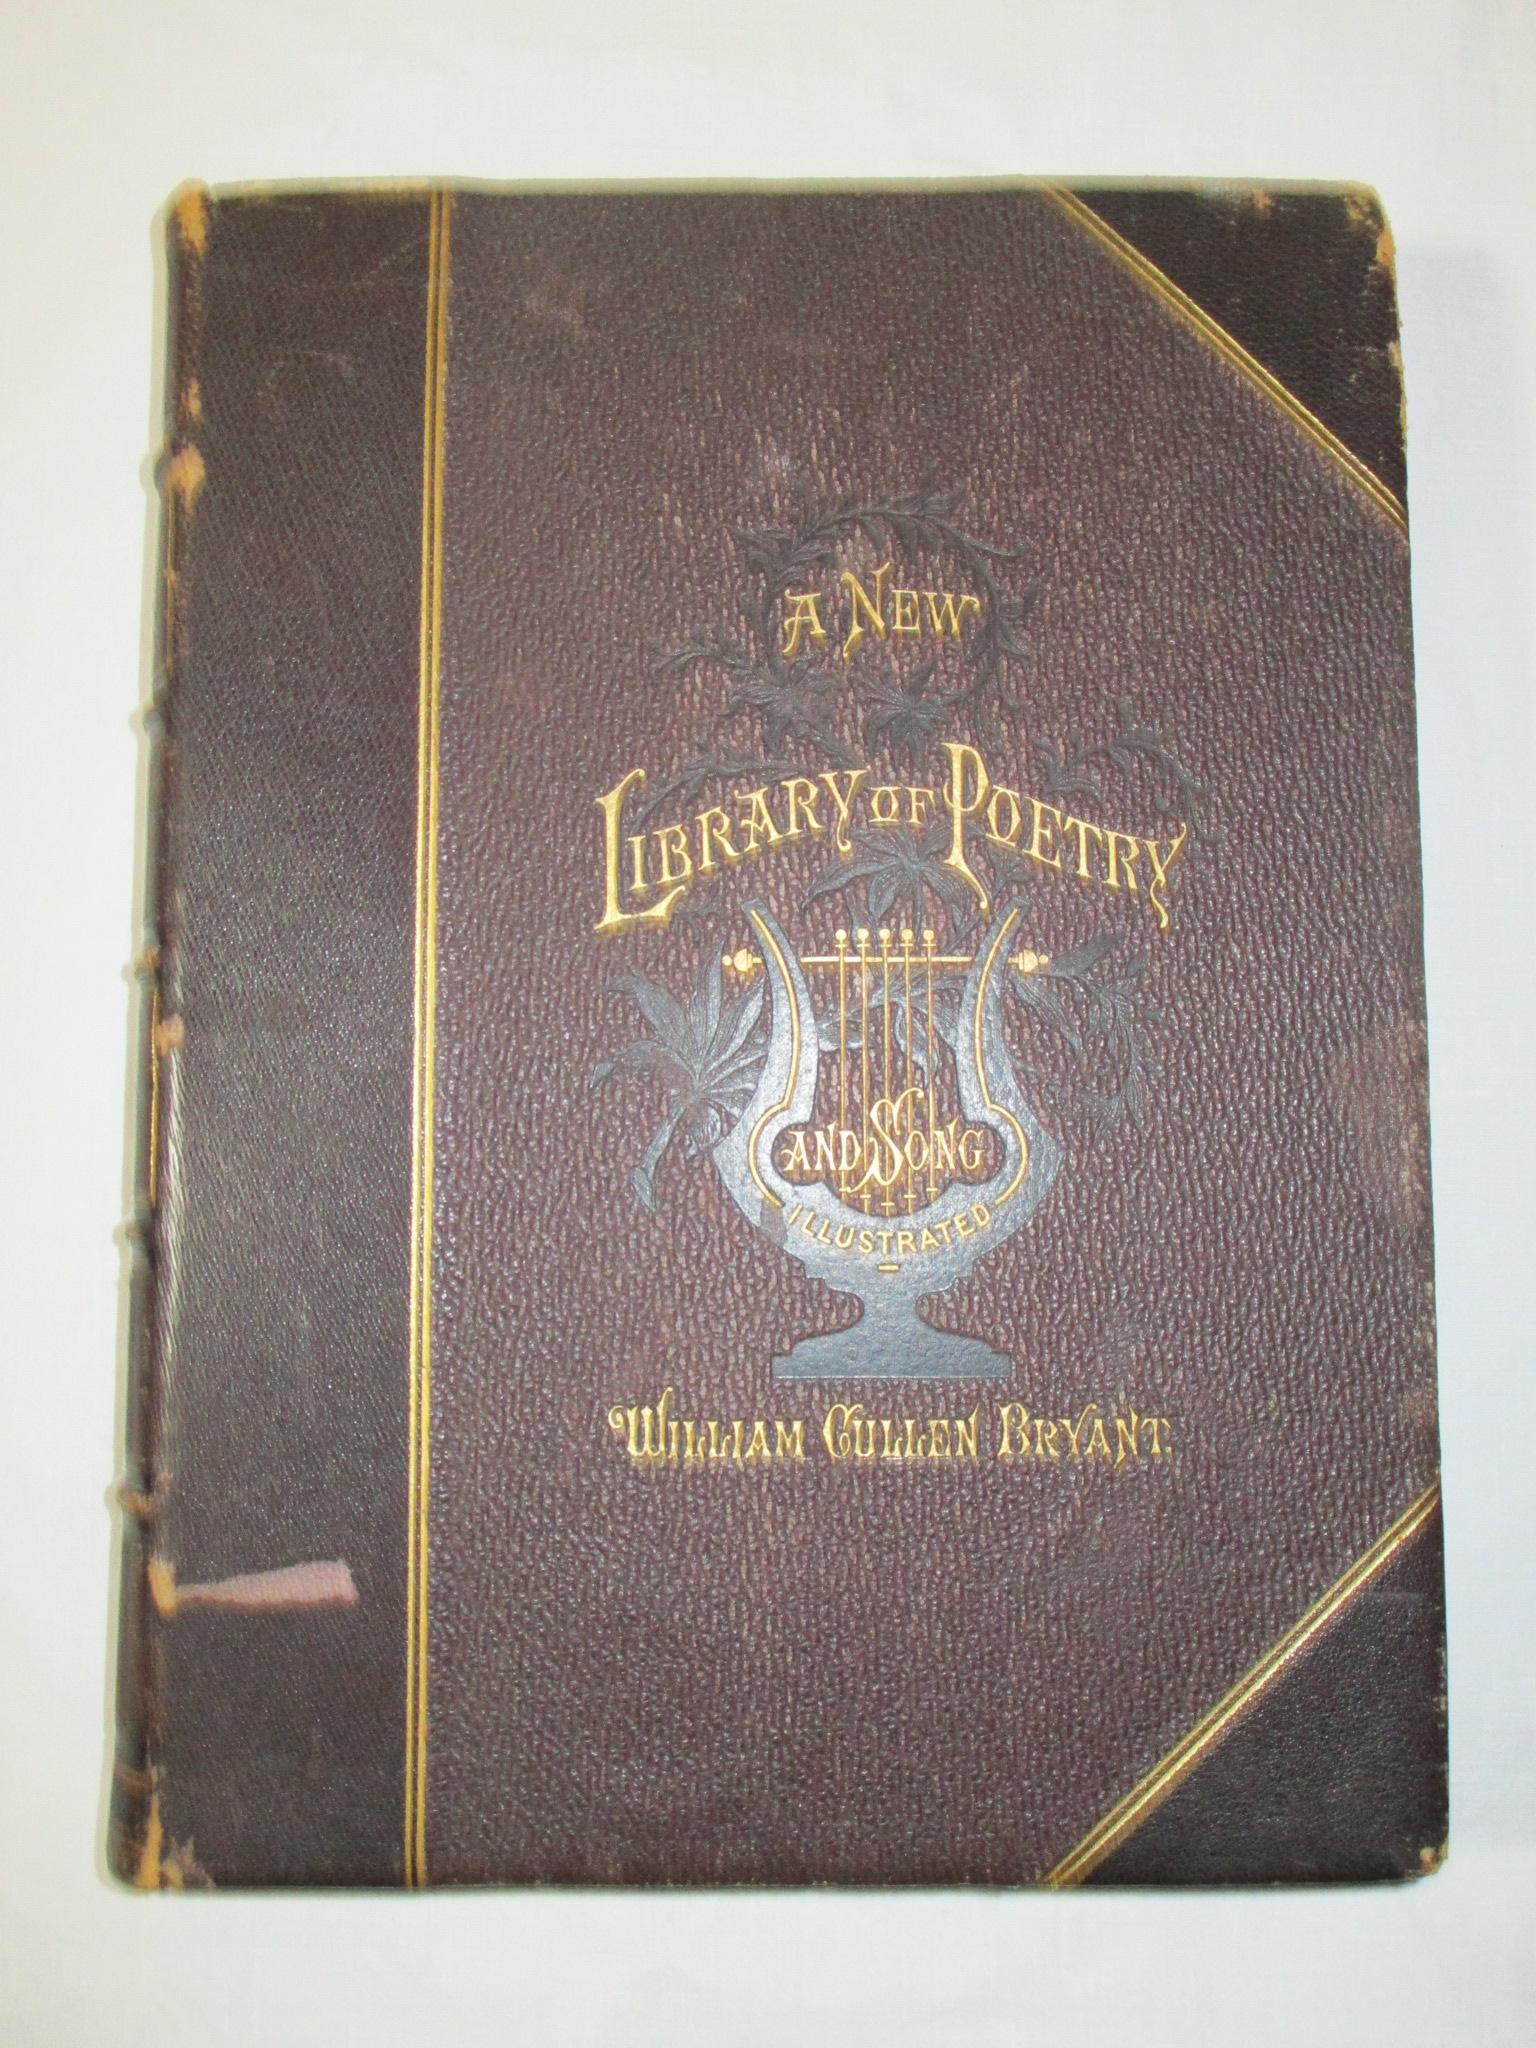 Vintage Book Edited by William Cullen Bryant - A New Library of Poetry & Song